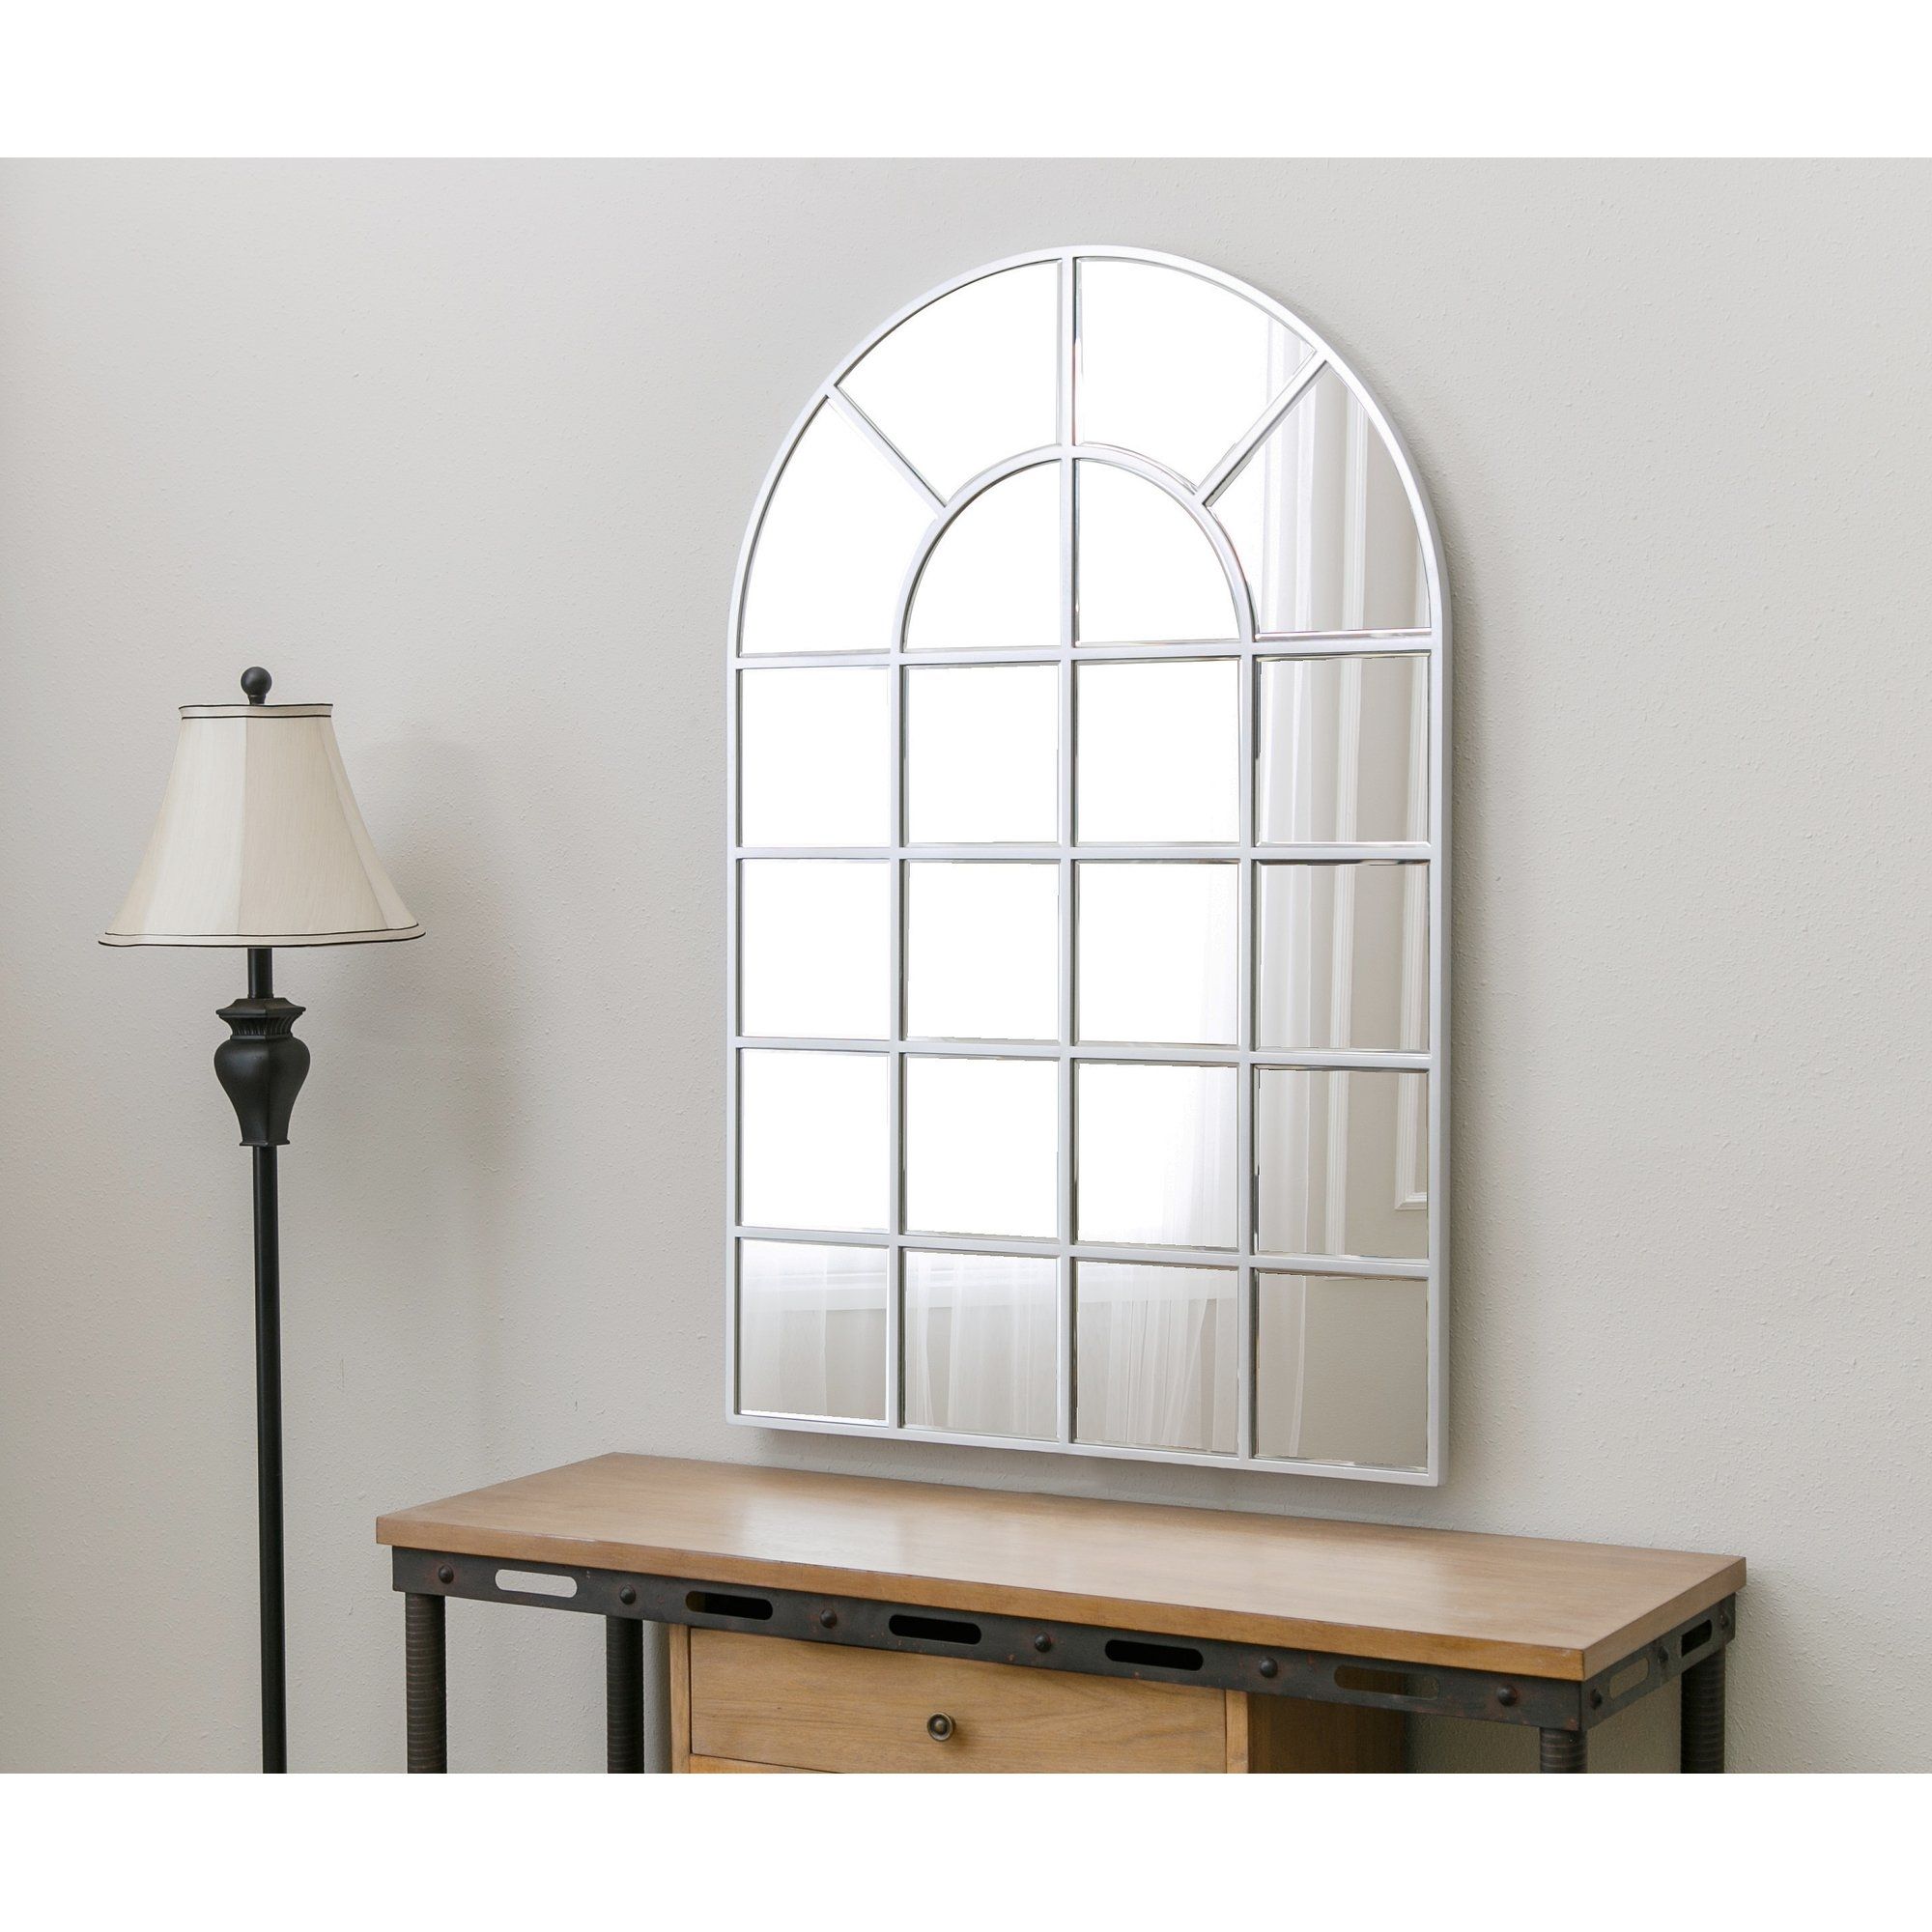 Red Barrel Studio Arched Wall Mirror Reviews Wayfair For Arched Wall Mirrors (Photo 8 of 15)